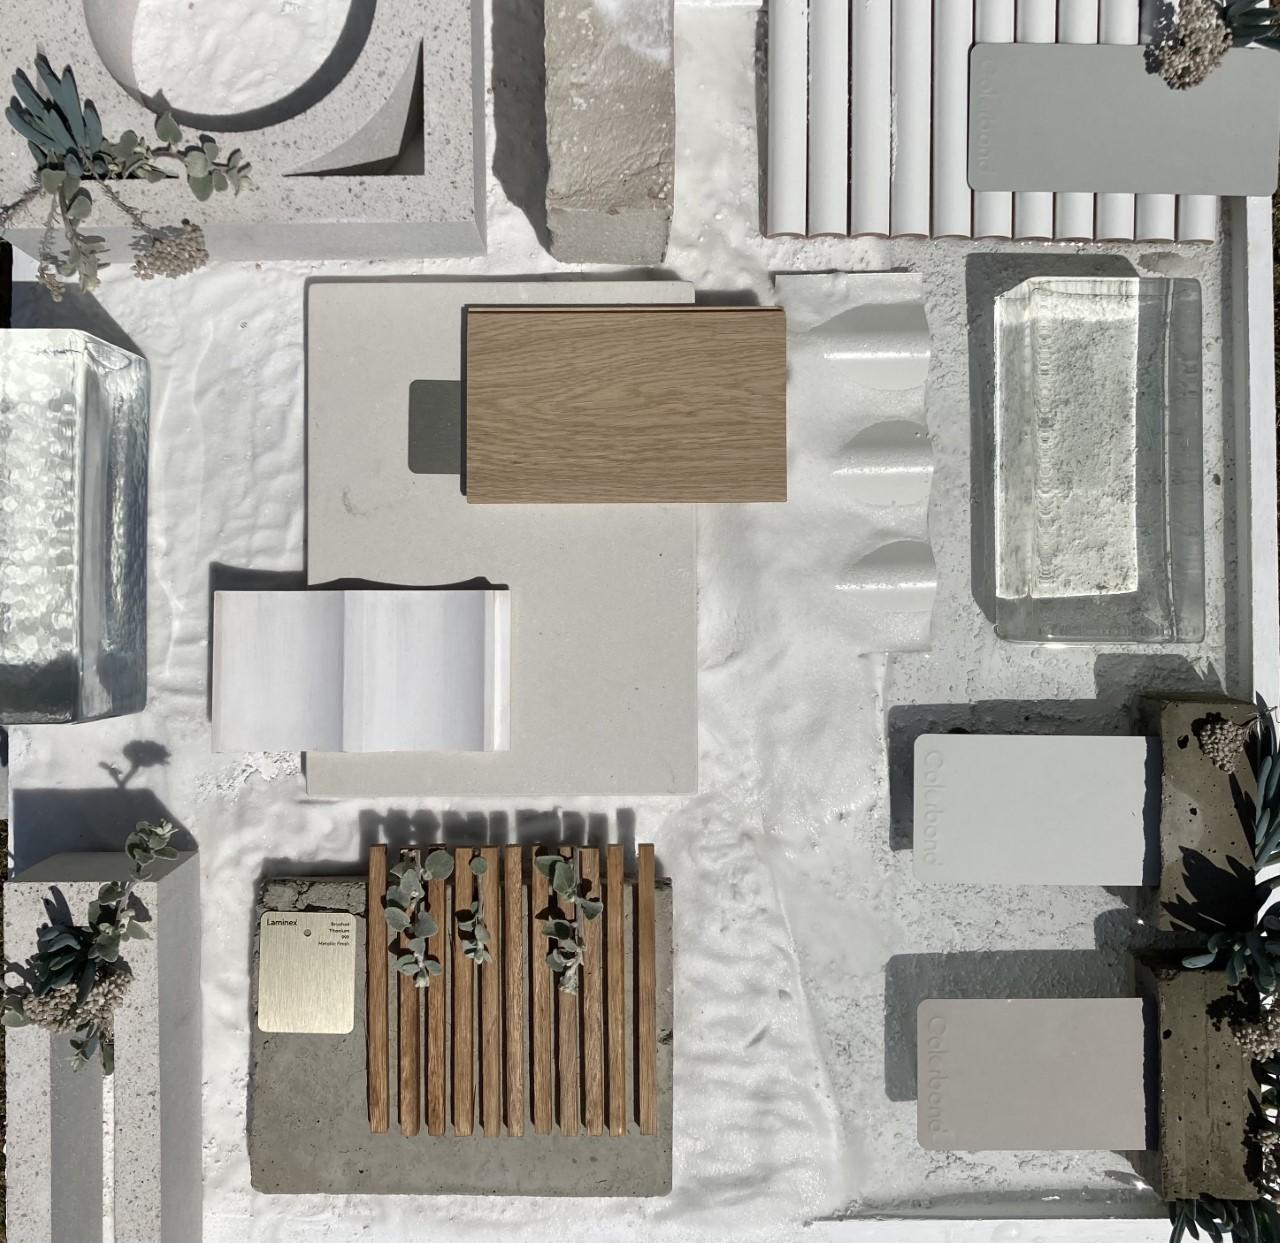 Pale Tones flatlay incorporating COLORBOND® steel. These pale tones are naturally inspired, light and equally at home on contemporary or heritage buildings. Photographer: Rebecca Love